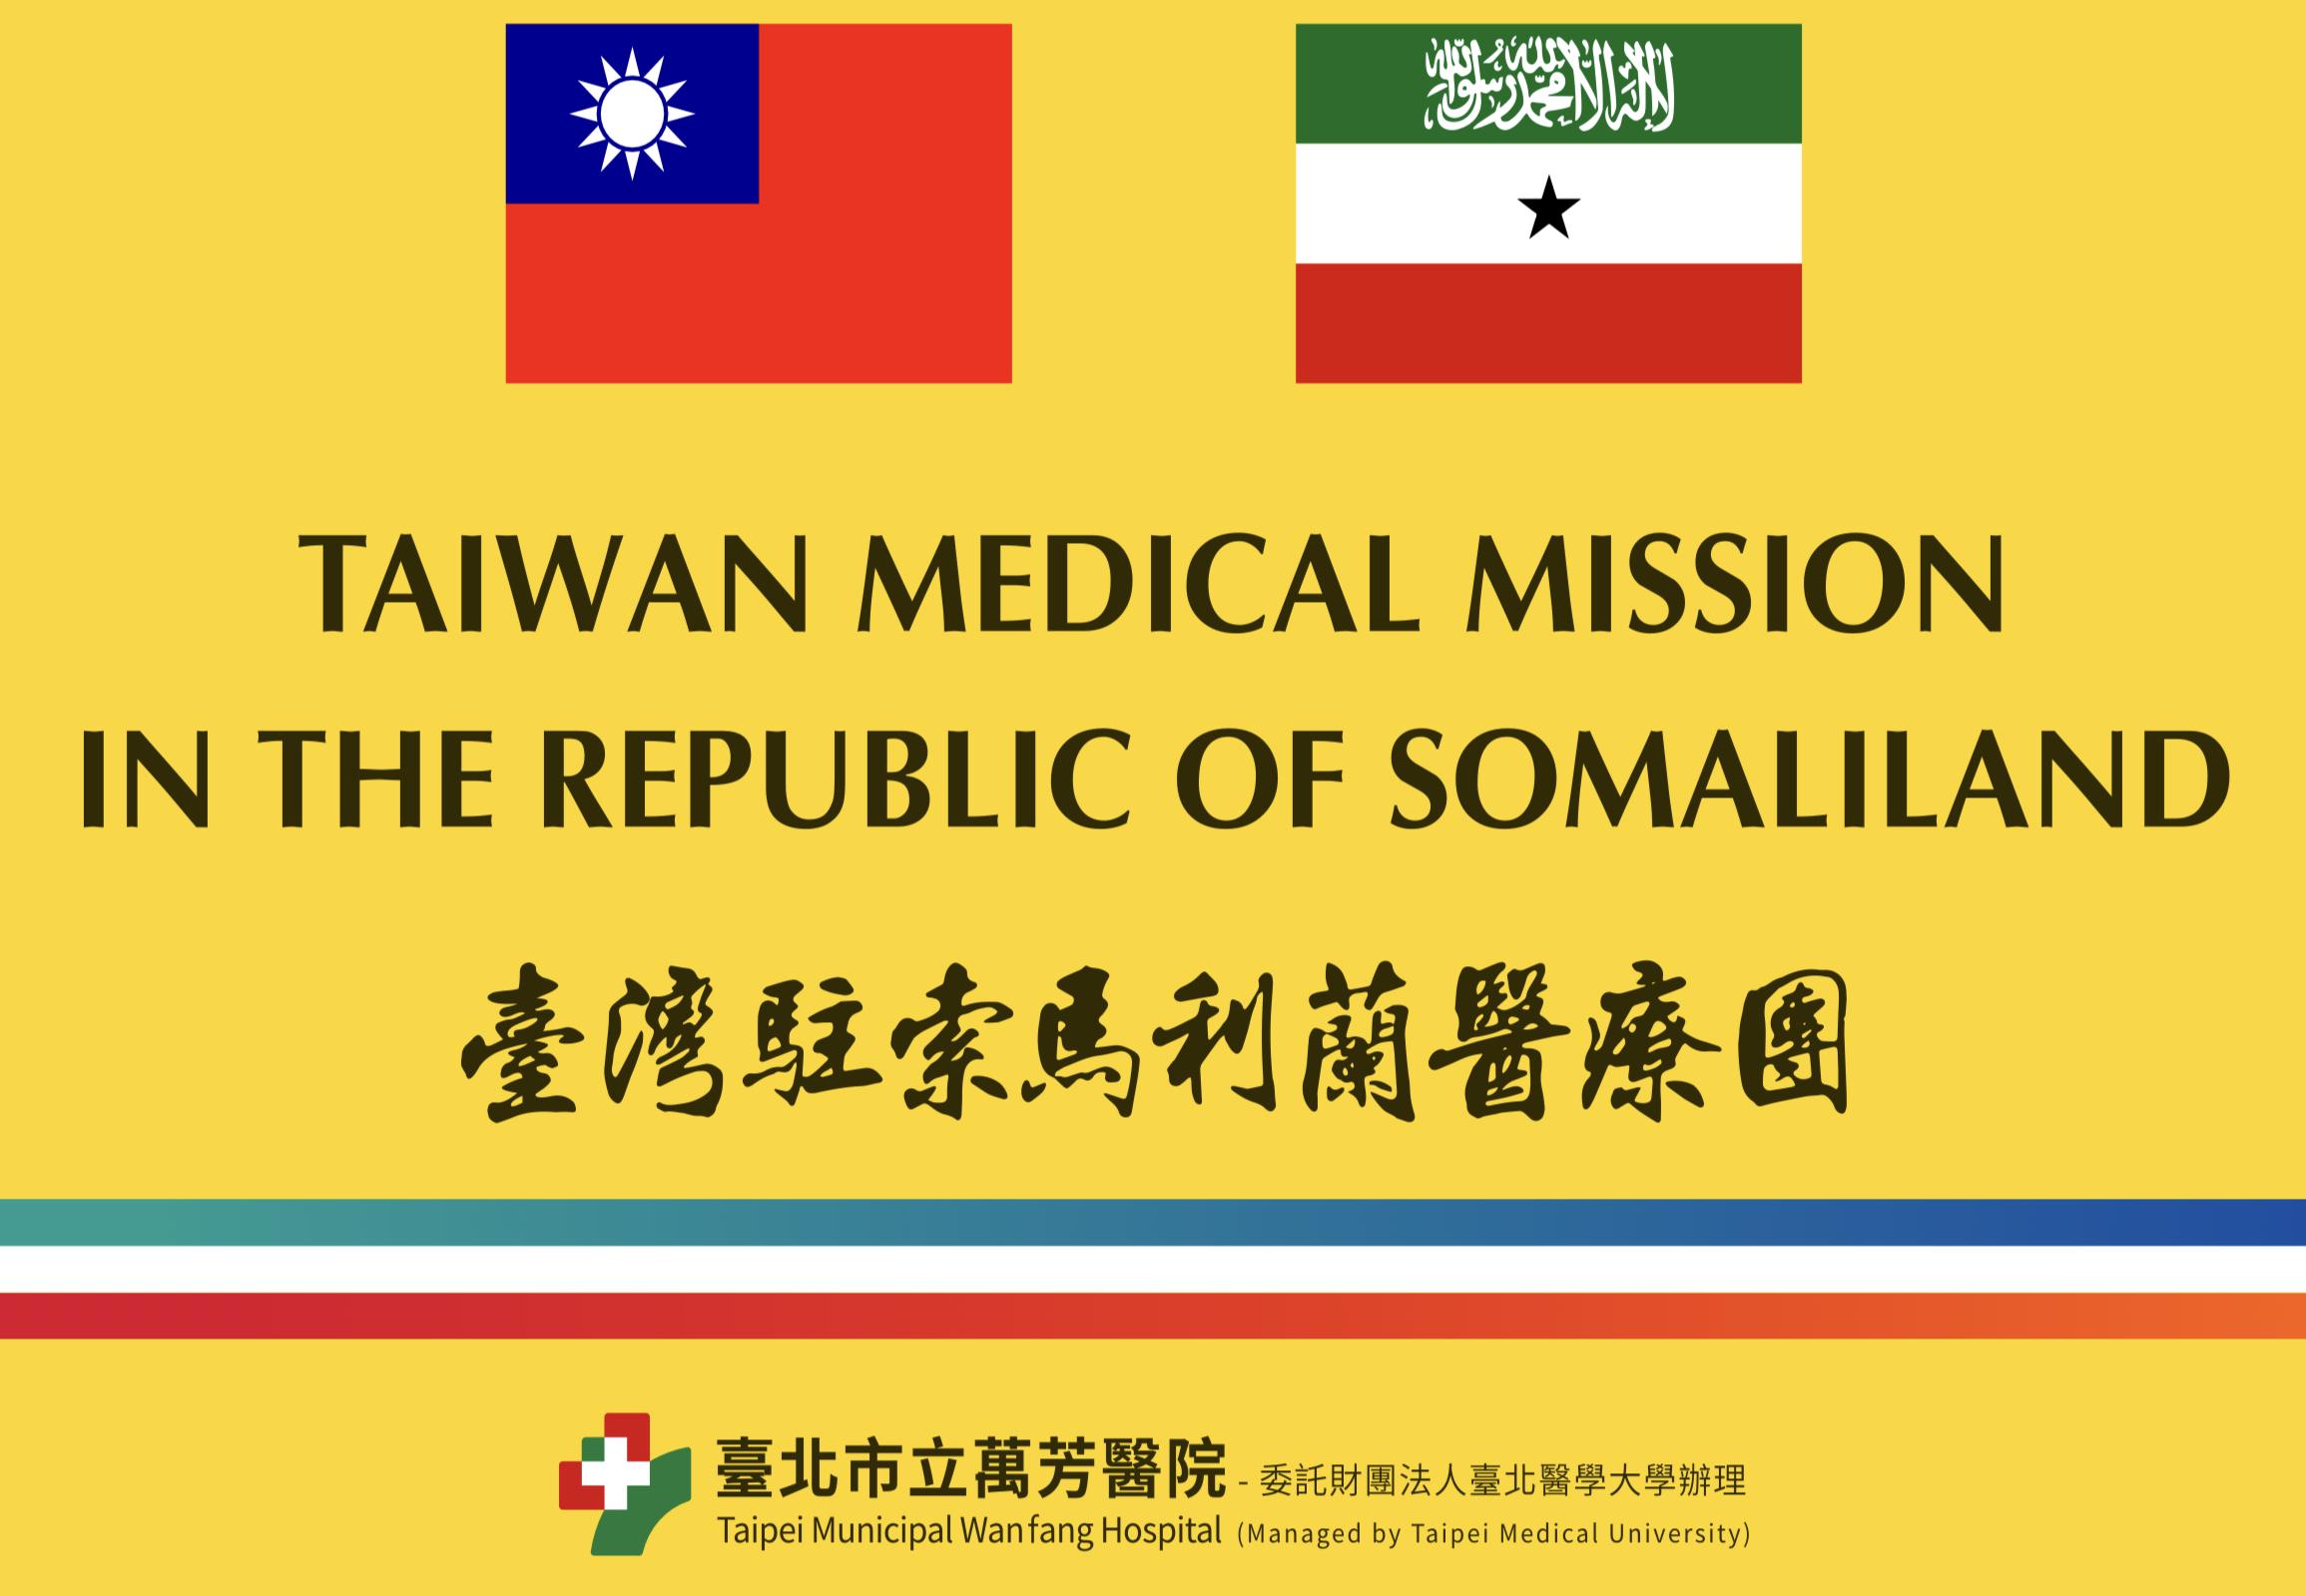 The Taiwan Medical Mission's purchase of oral cancer screening devices and supplies for their medical mission in Somaliland: Request for Quotation: Oral Cancer Screening Devices, Imaging system, and Supplies The Taiwan Medical Mission in the Republic of Somaliland seeks quotations from qualified vendors for specialized medical devices and supplies to screen for oral cancer and abnormalities during our upcoming medical campaign. Device Specifications: - Portable, handheld device designed to enhance visualization of oral mucosal abnormalities that may not be visible upon routine examination. Intended for use as an adjunct tool by dental and medical professionals. - Utilizes natural tissue fluorescence technology. - Rechargeable battery-powered. - Allows recording/capturing of images for documentation. - Requires disposable protective caps and sheaths. Items Required: - 1 main screening device with all included components like charging station, glasses, guide materials, etc. - 1 integrated camera system for image capturing with necessary adapters. (suggestion: Apple iPod touch, 7th Generation, or later) - 512 count protective caps for device tip. - 500 pieces protective sheaths for device body, with a good vent for heat spreading. Quotations must include: - Company details - Itemized list with unit prices - Total amount - Applicable dates - Two years warranty from the delivery date, covering any defects in materials or workmanship. - Product “Made in China” is not allowed for procurement by Taiwan Government Documentation required upon purchase: invoice, receipt with vendor details, itemized list, amounts, and dates. Before Wednesday, 22 Nov 2023, at 17:00 pm, interested bidders are invited to submit proposals that include technical specifications and pricing information. Send proposal submissions to 111297@w.tmu.edu.tw. TMM reserves the right to accept or reject all bids without assigning any reason. The opening of bids will occur on Thursday, 23 Nov 2023, at 10:00 am. The victor must satisfy the criteria mentioned above. Thank you for your interest in supplying vital medical equipment for our mission. We look forward to your quotation. 